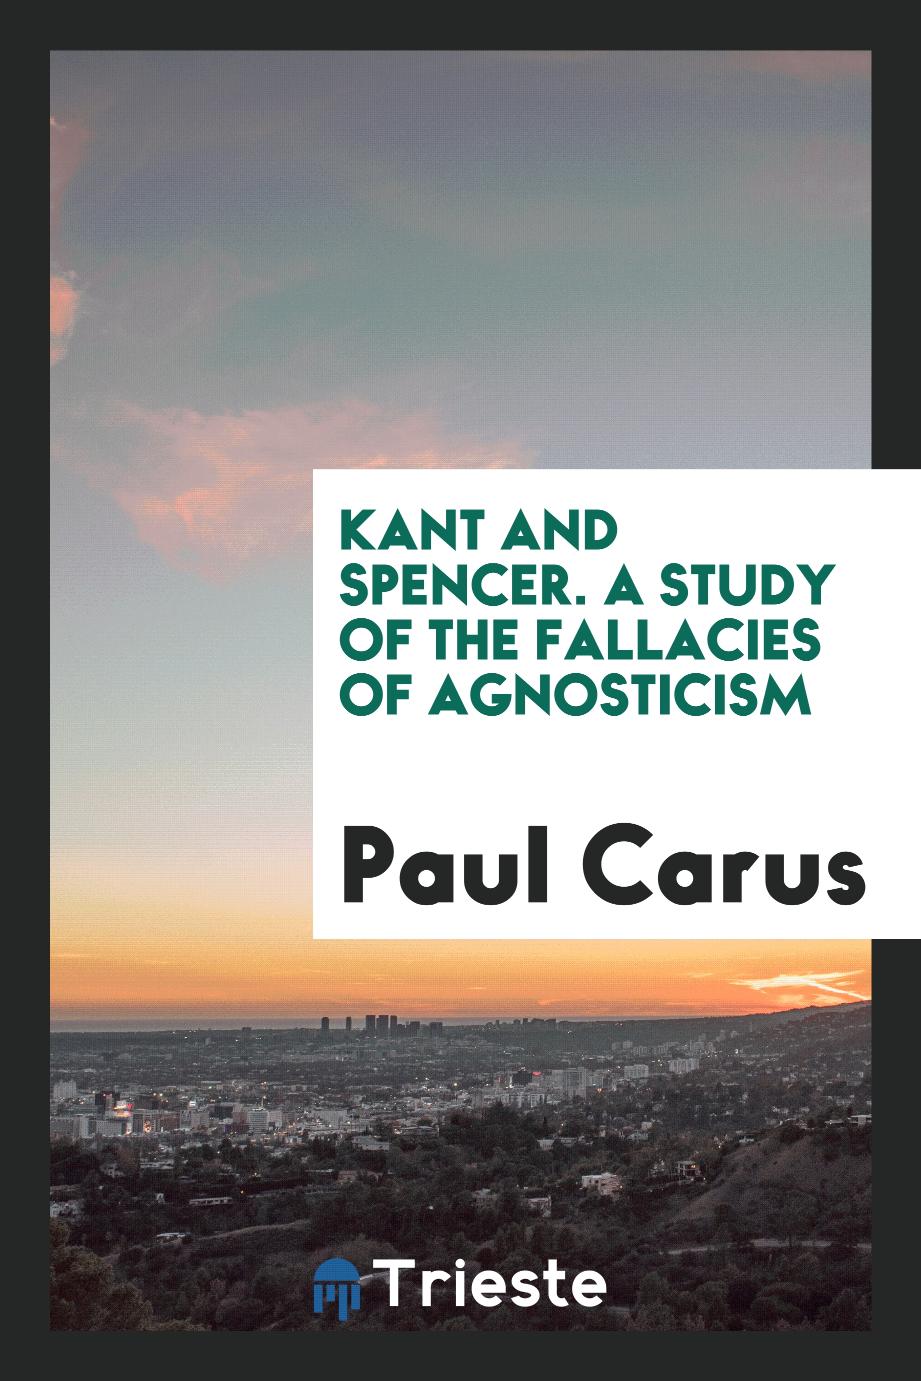 Kant and Spencer. A Study of the Fallacies of Agnosticism